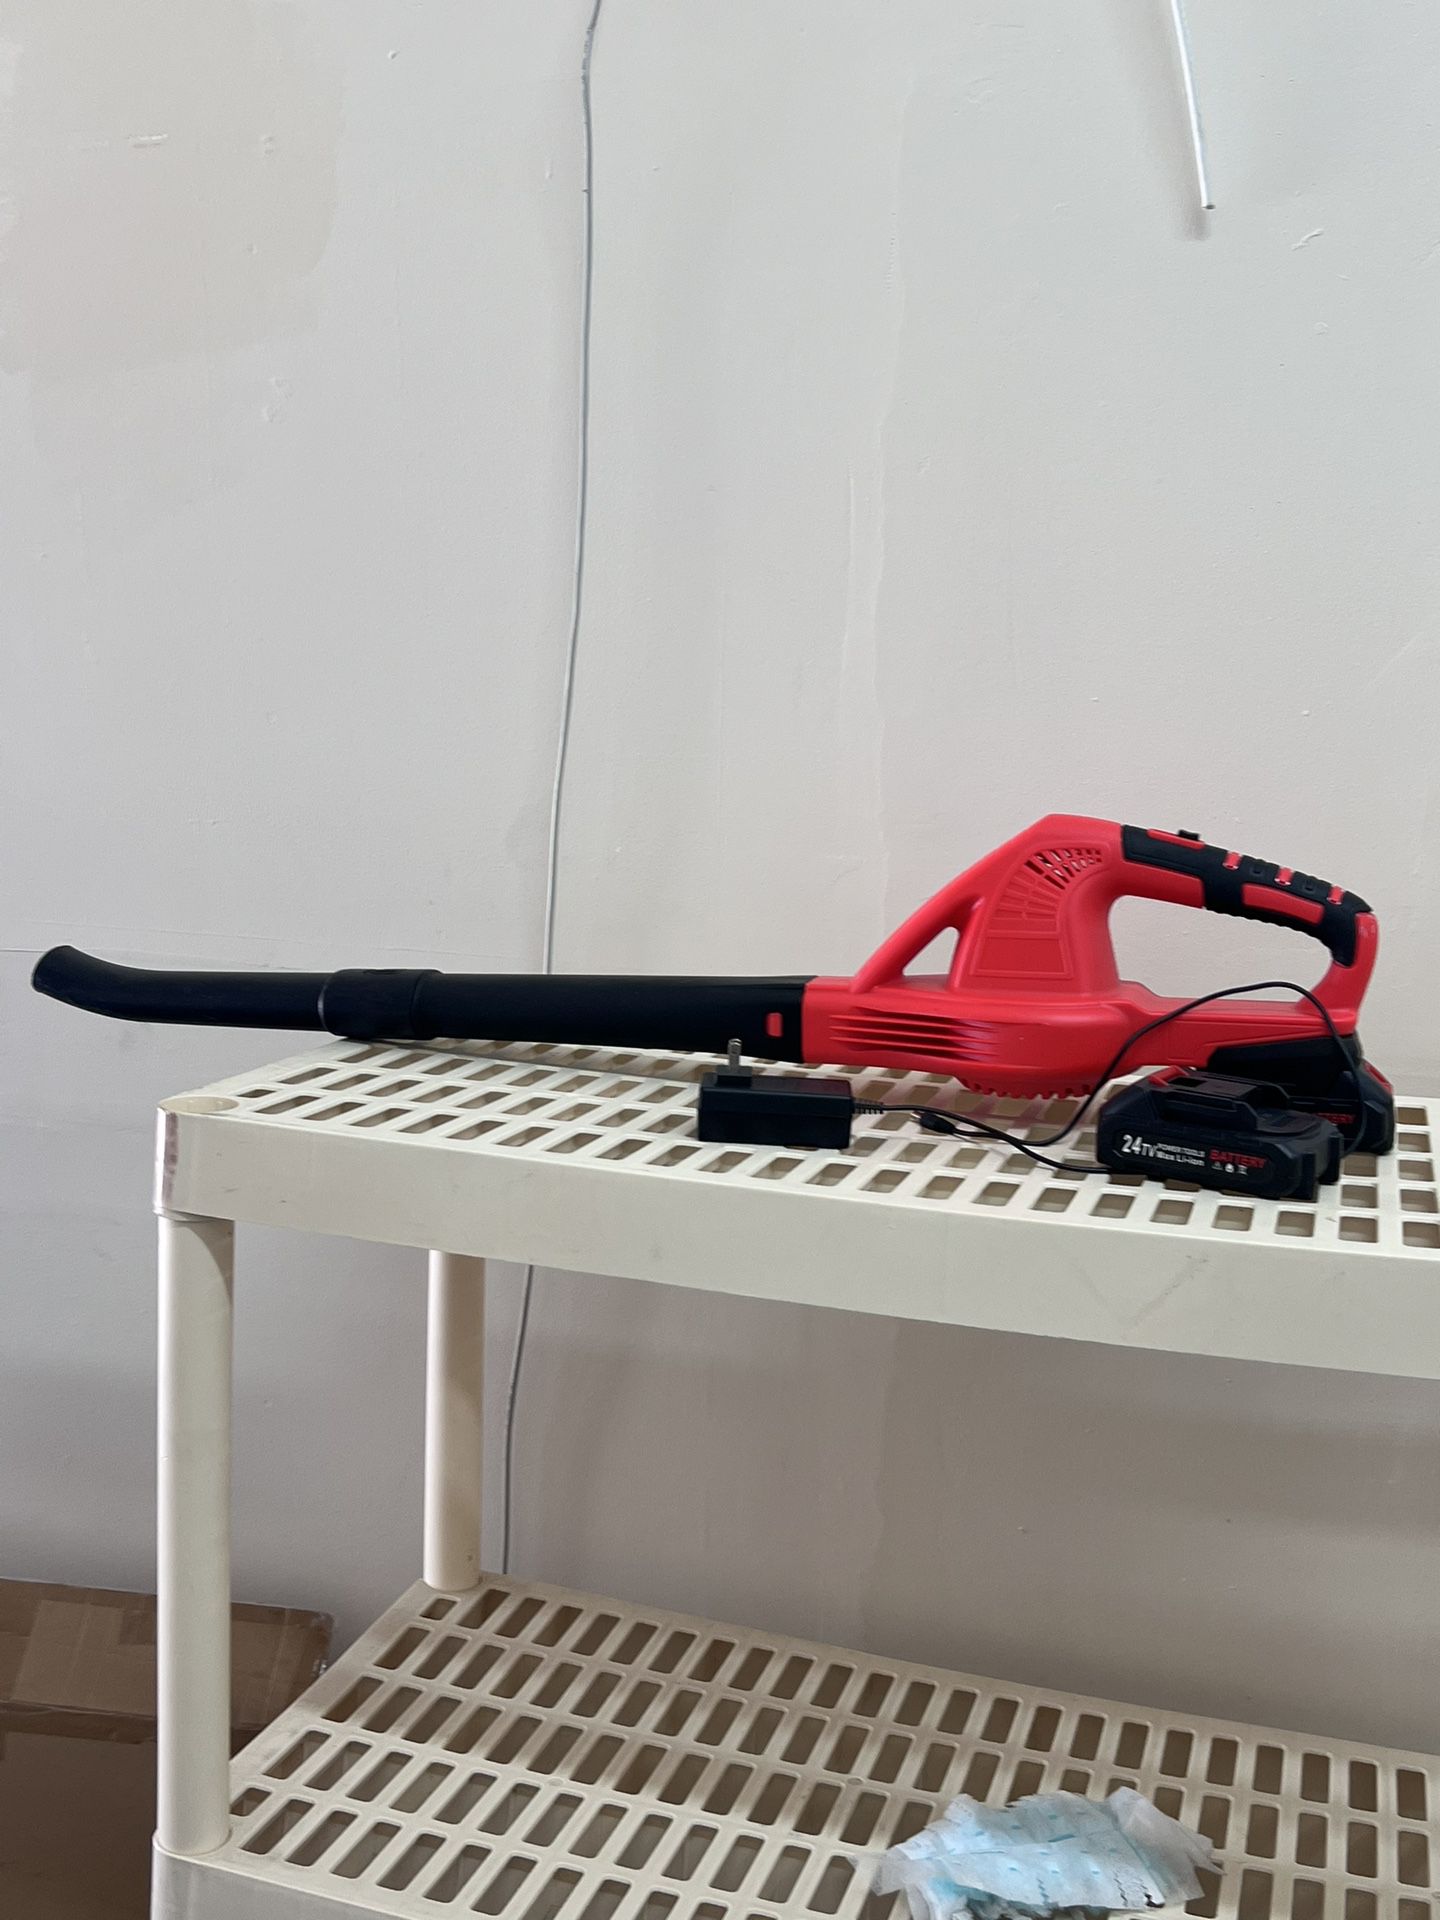 Cordless Leaf Blower, 20V Lightweight Electric Blower with Battery and Charger